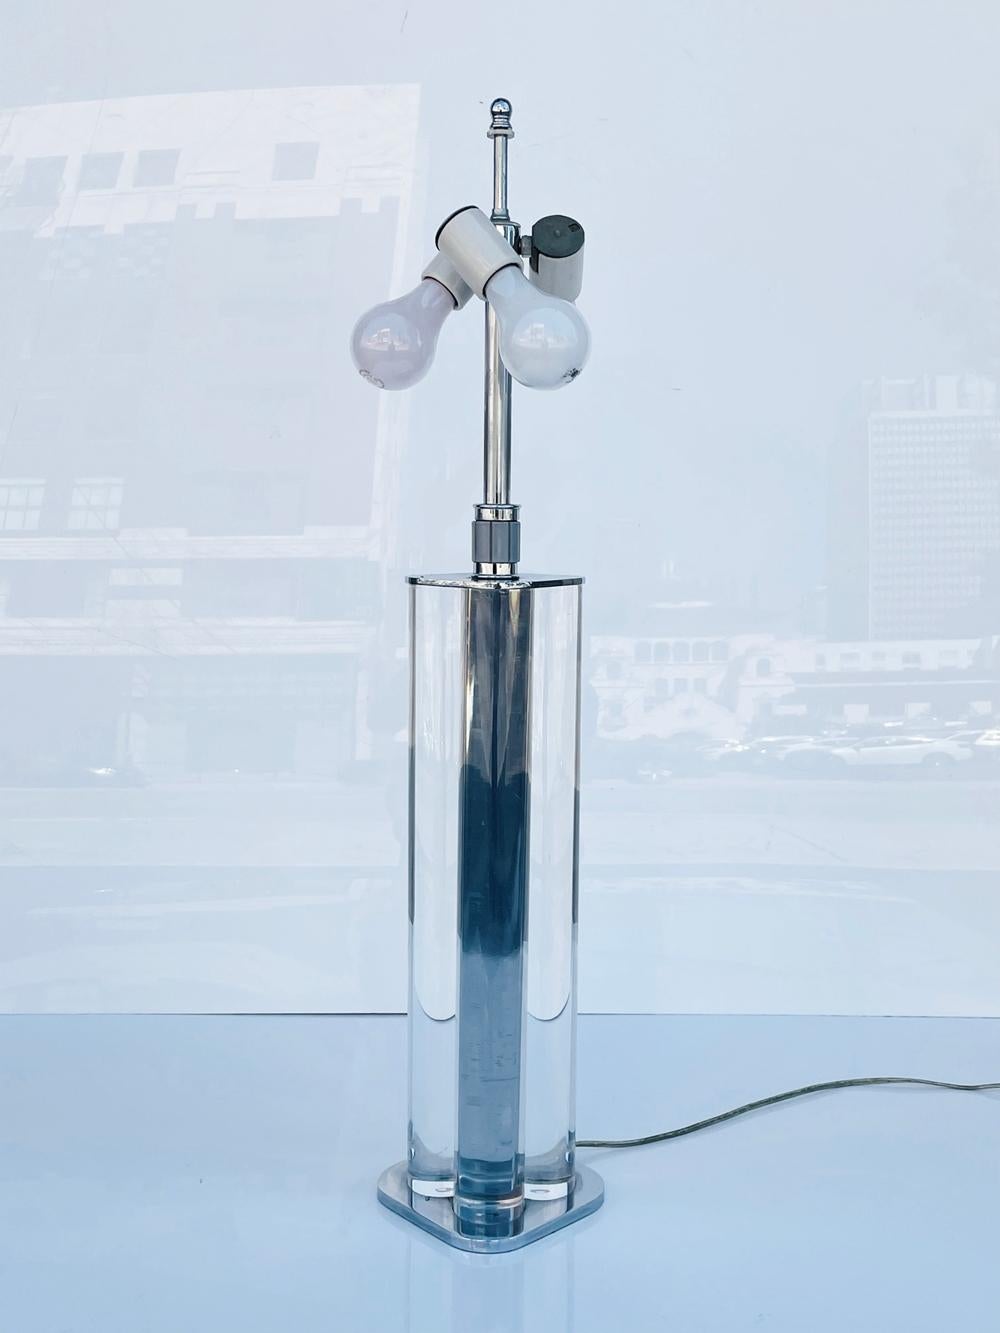 Beautiful table lamp with a chrome base and thick lucite rods in the style of Karl Springer.

The lamp takes 3 light bulbs, is it retains the original wiring.A true Mid Century modern statement piece.

Measurements:
30.50 inches high x 5.50